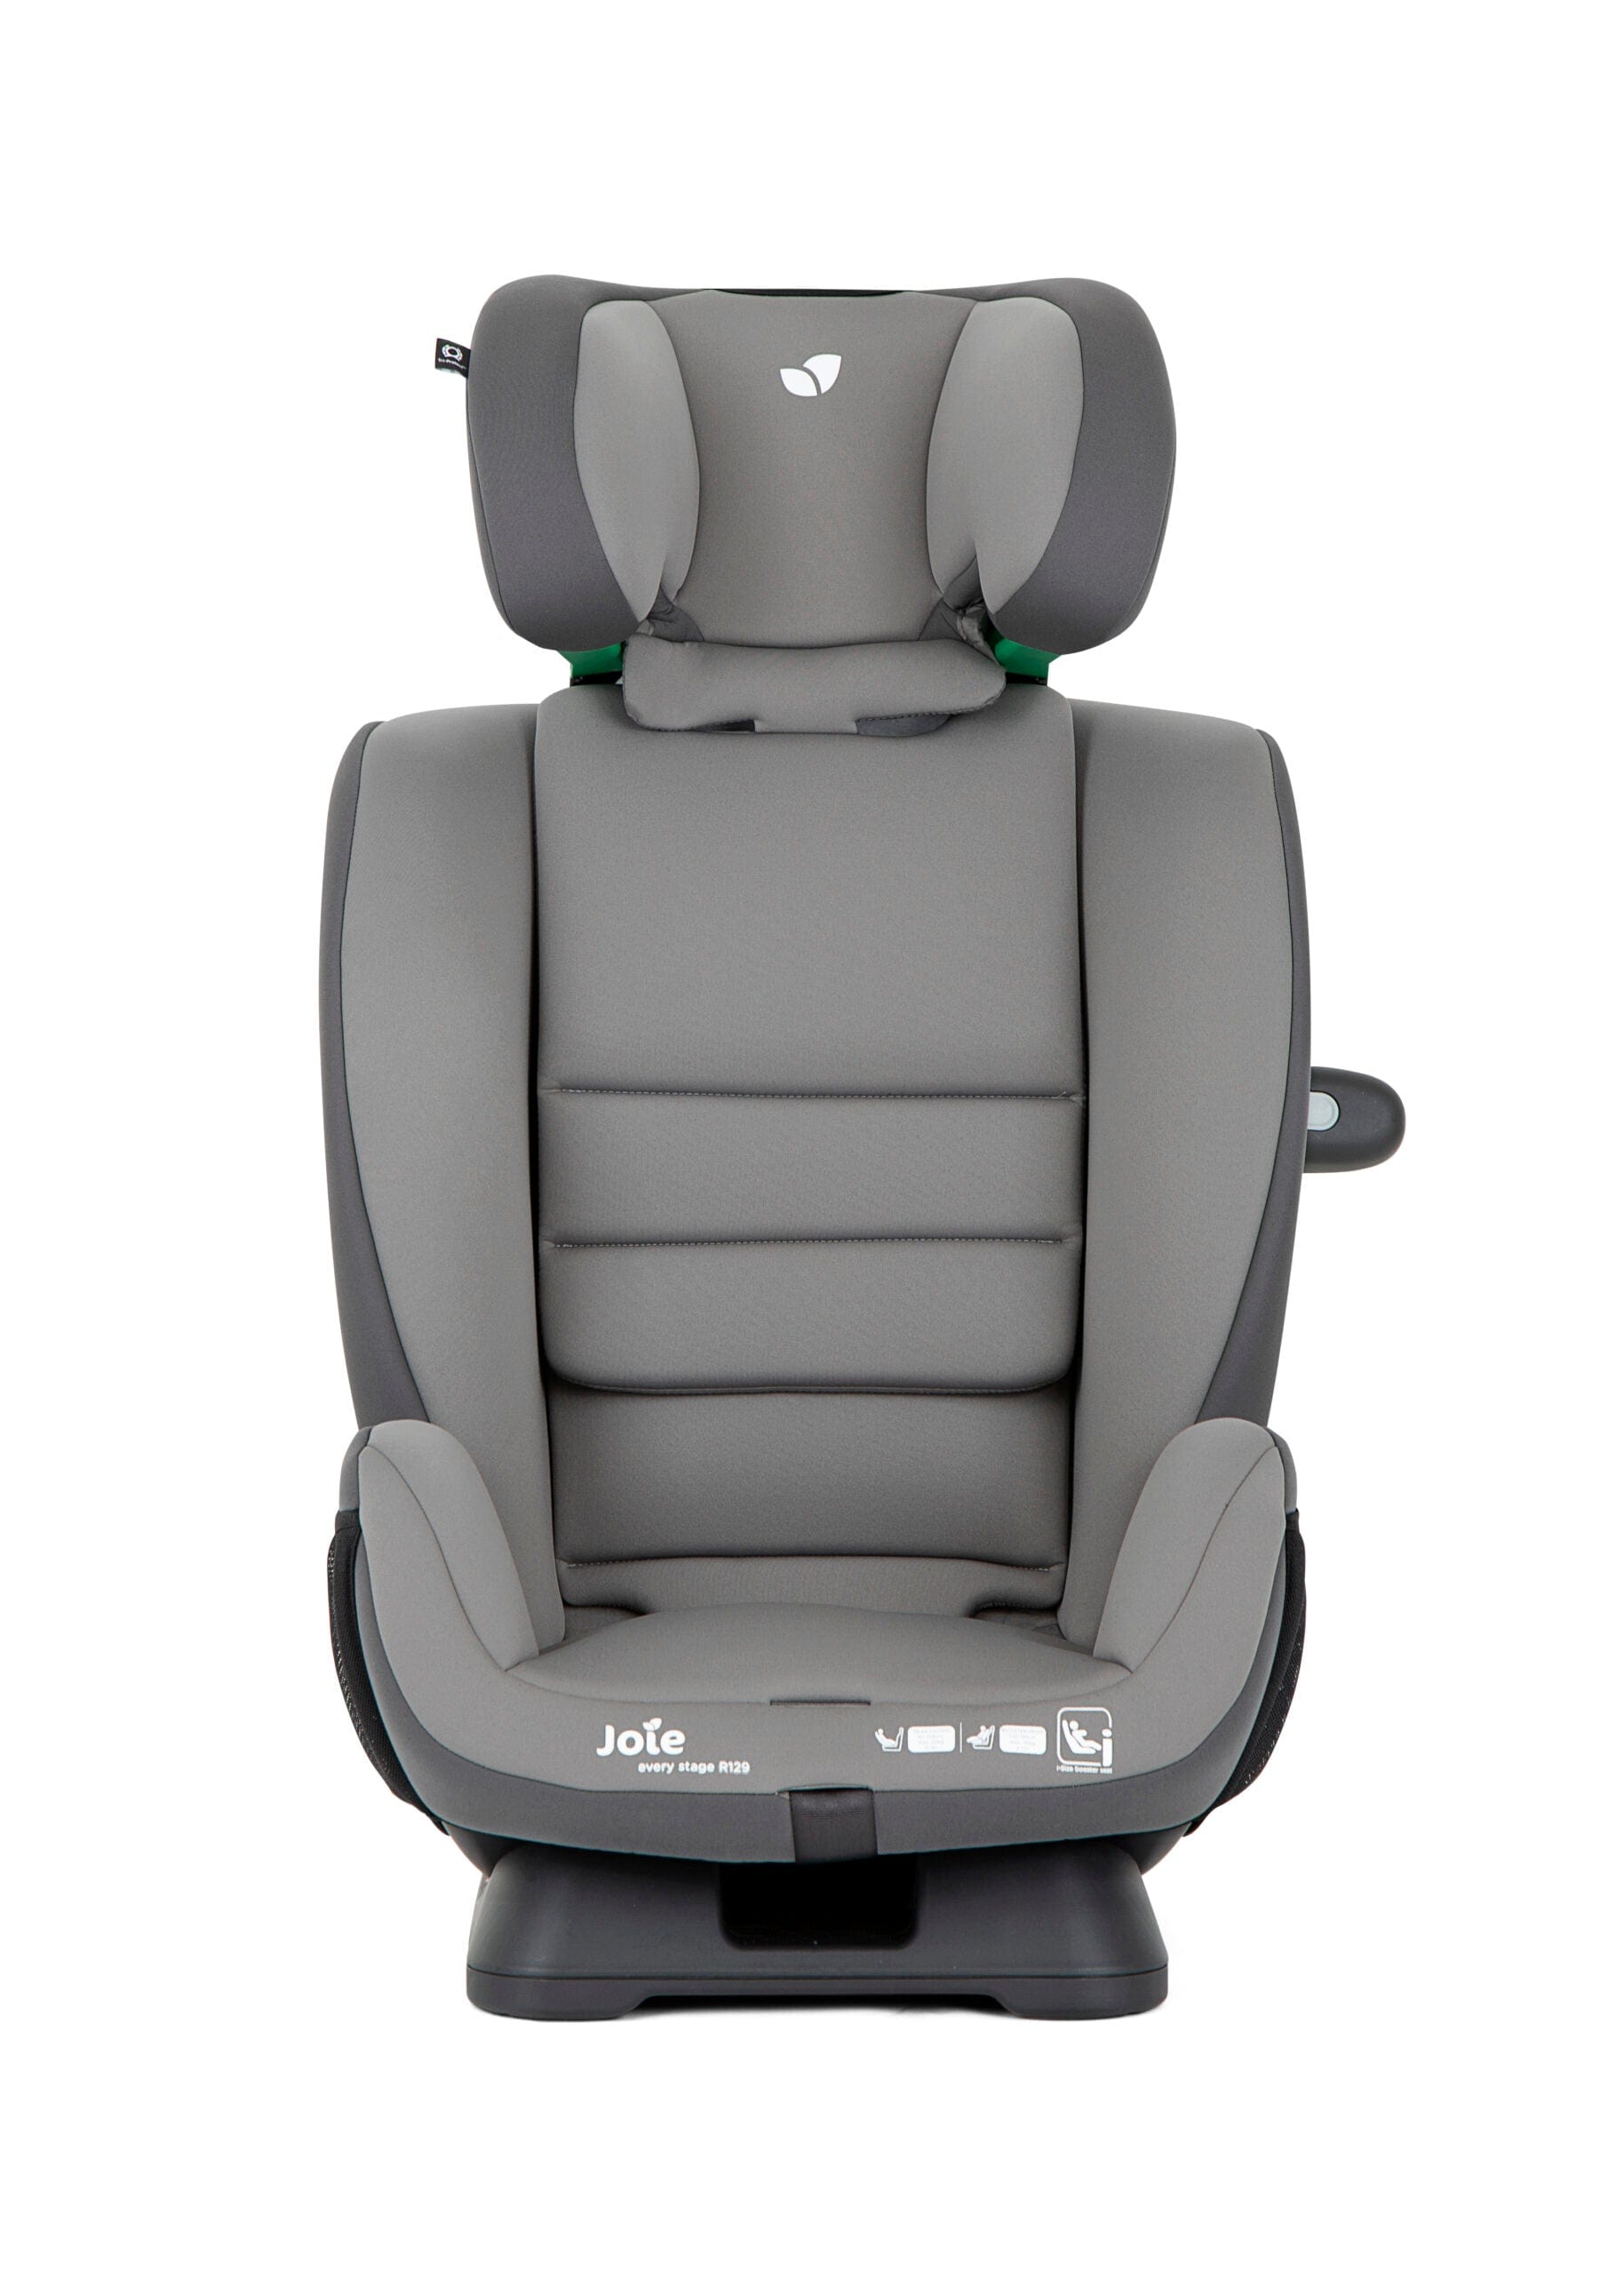 Joie combination car seats Every Stage R129 - Cobblestone C2117AACBL000